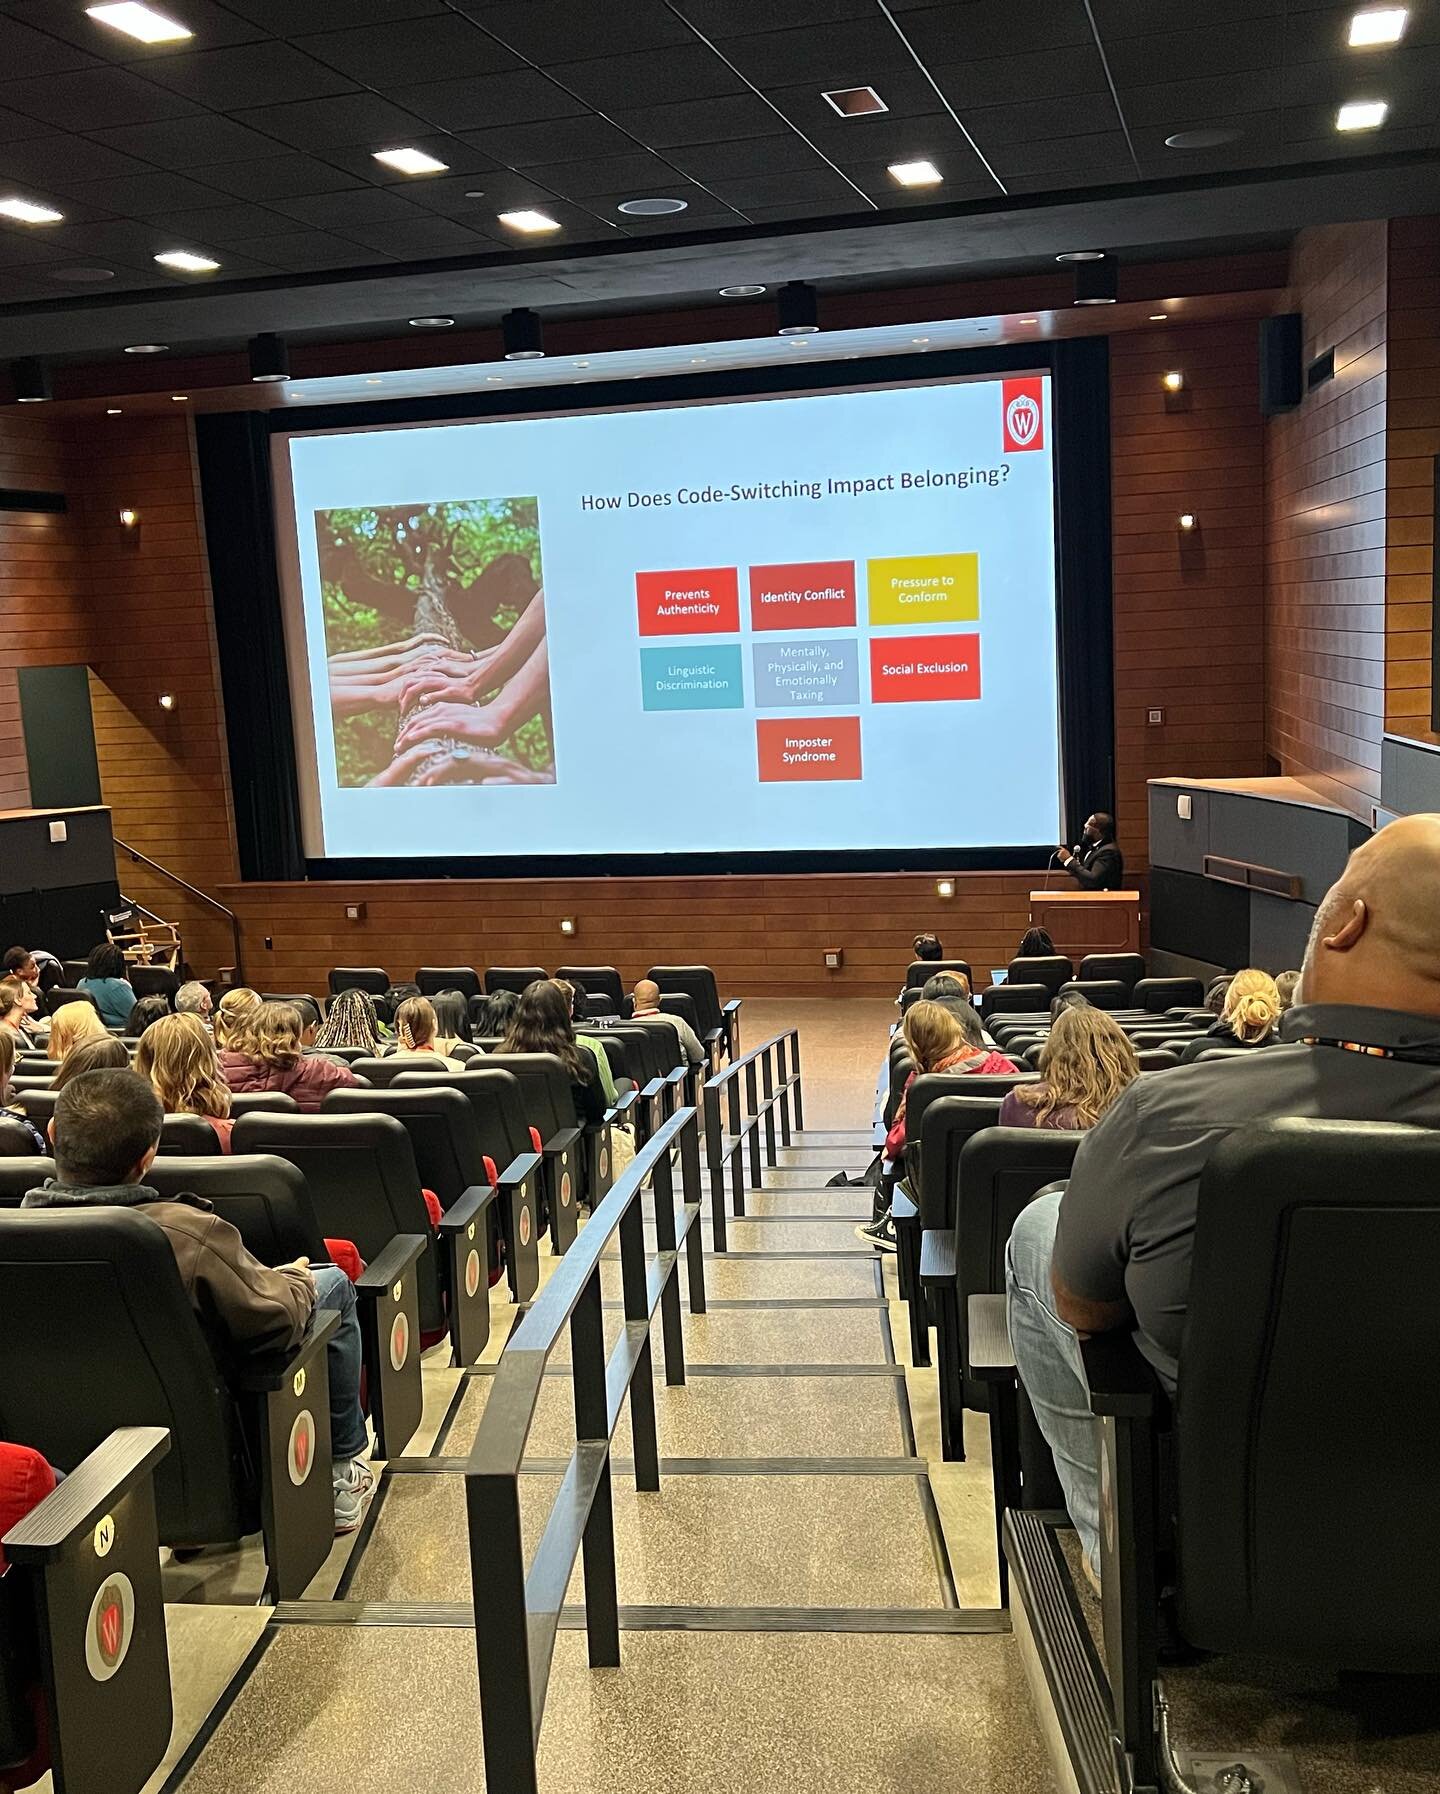 George Paasewe had the grand opportunity to speak at UW-Madison&rsquo;s 2023 Diversity Forum on the adverse effects of code-switching how it impacts belonging for employees of color. The energy and engagement level from the attendees were through the